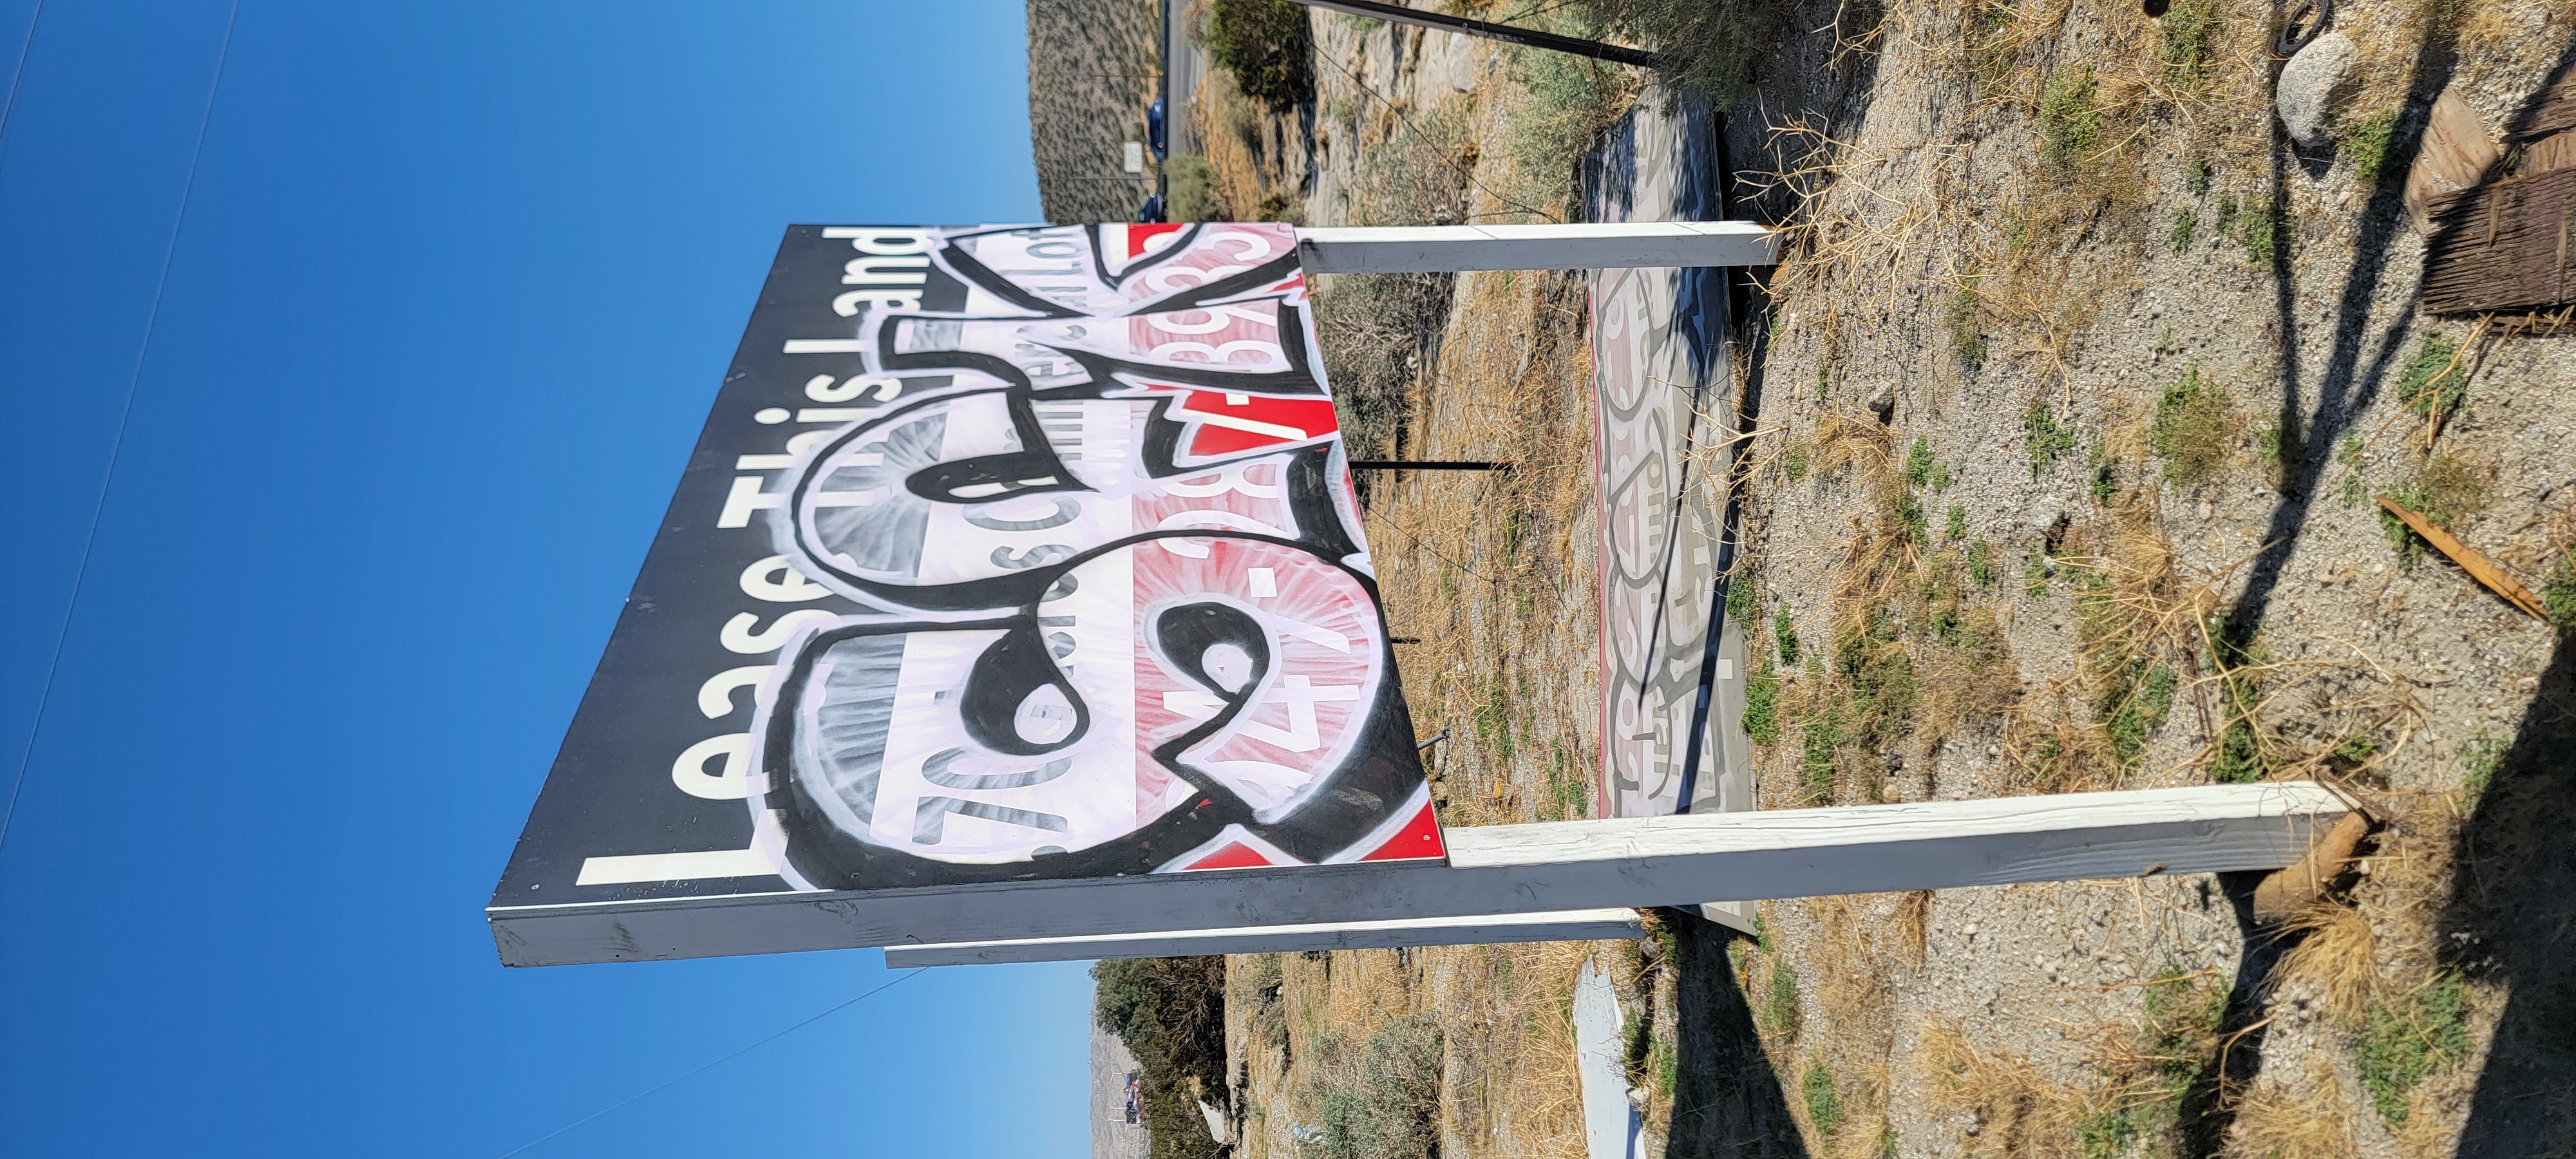 Top quality graffiti removal in Palm Springs, CA